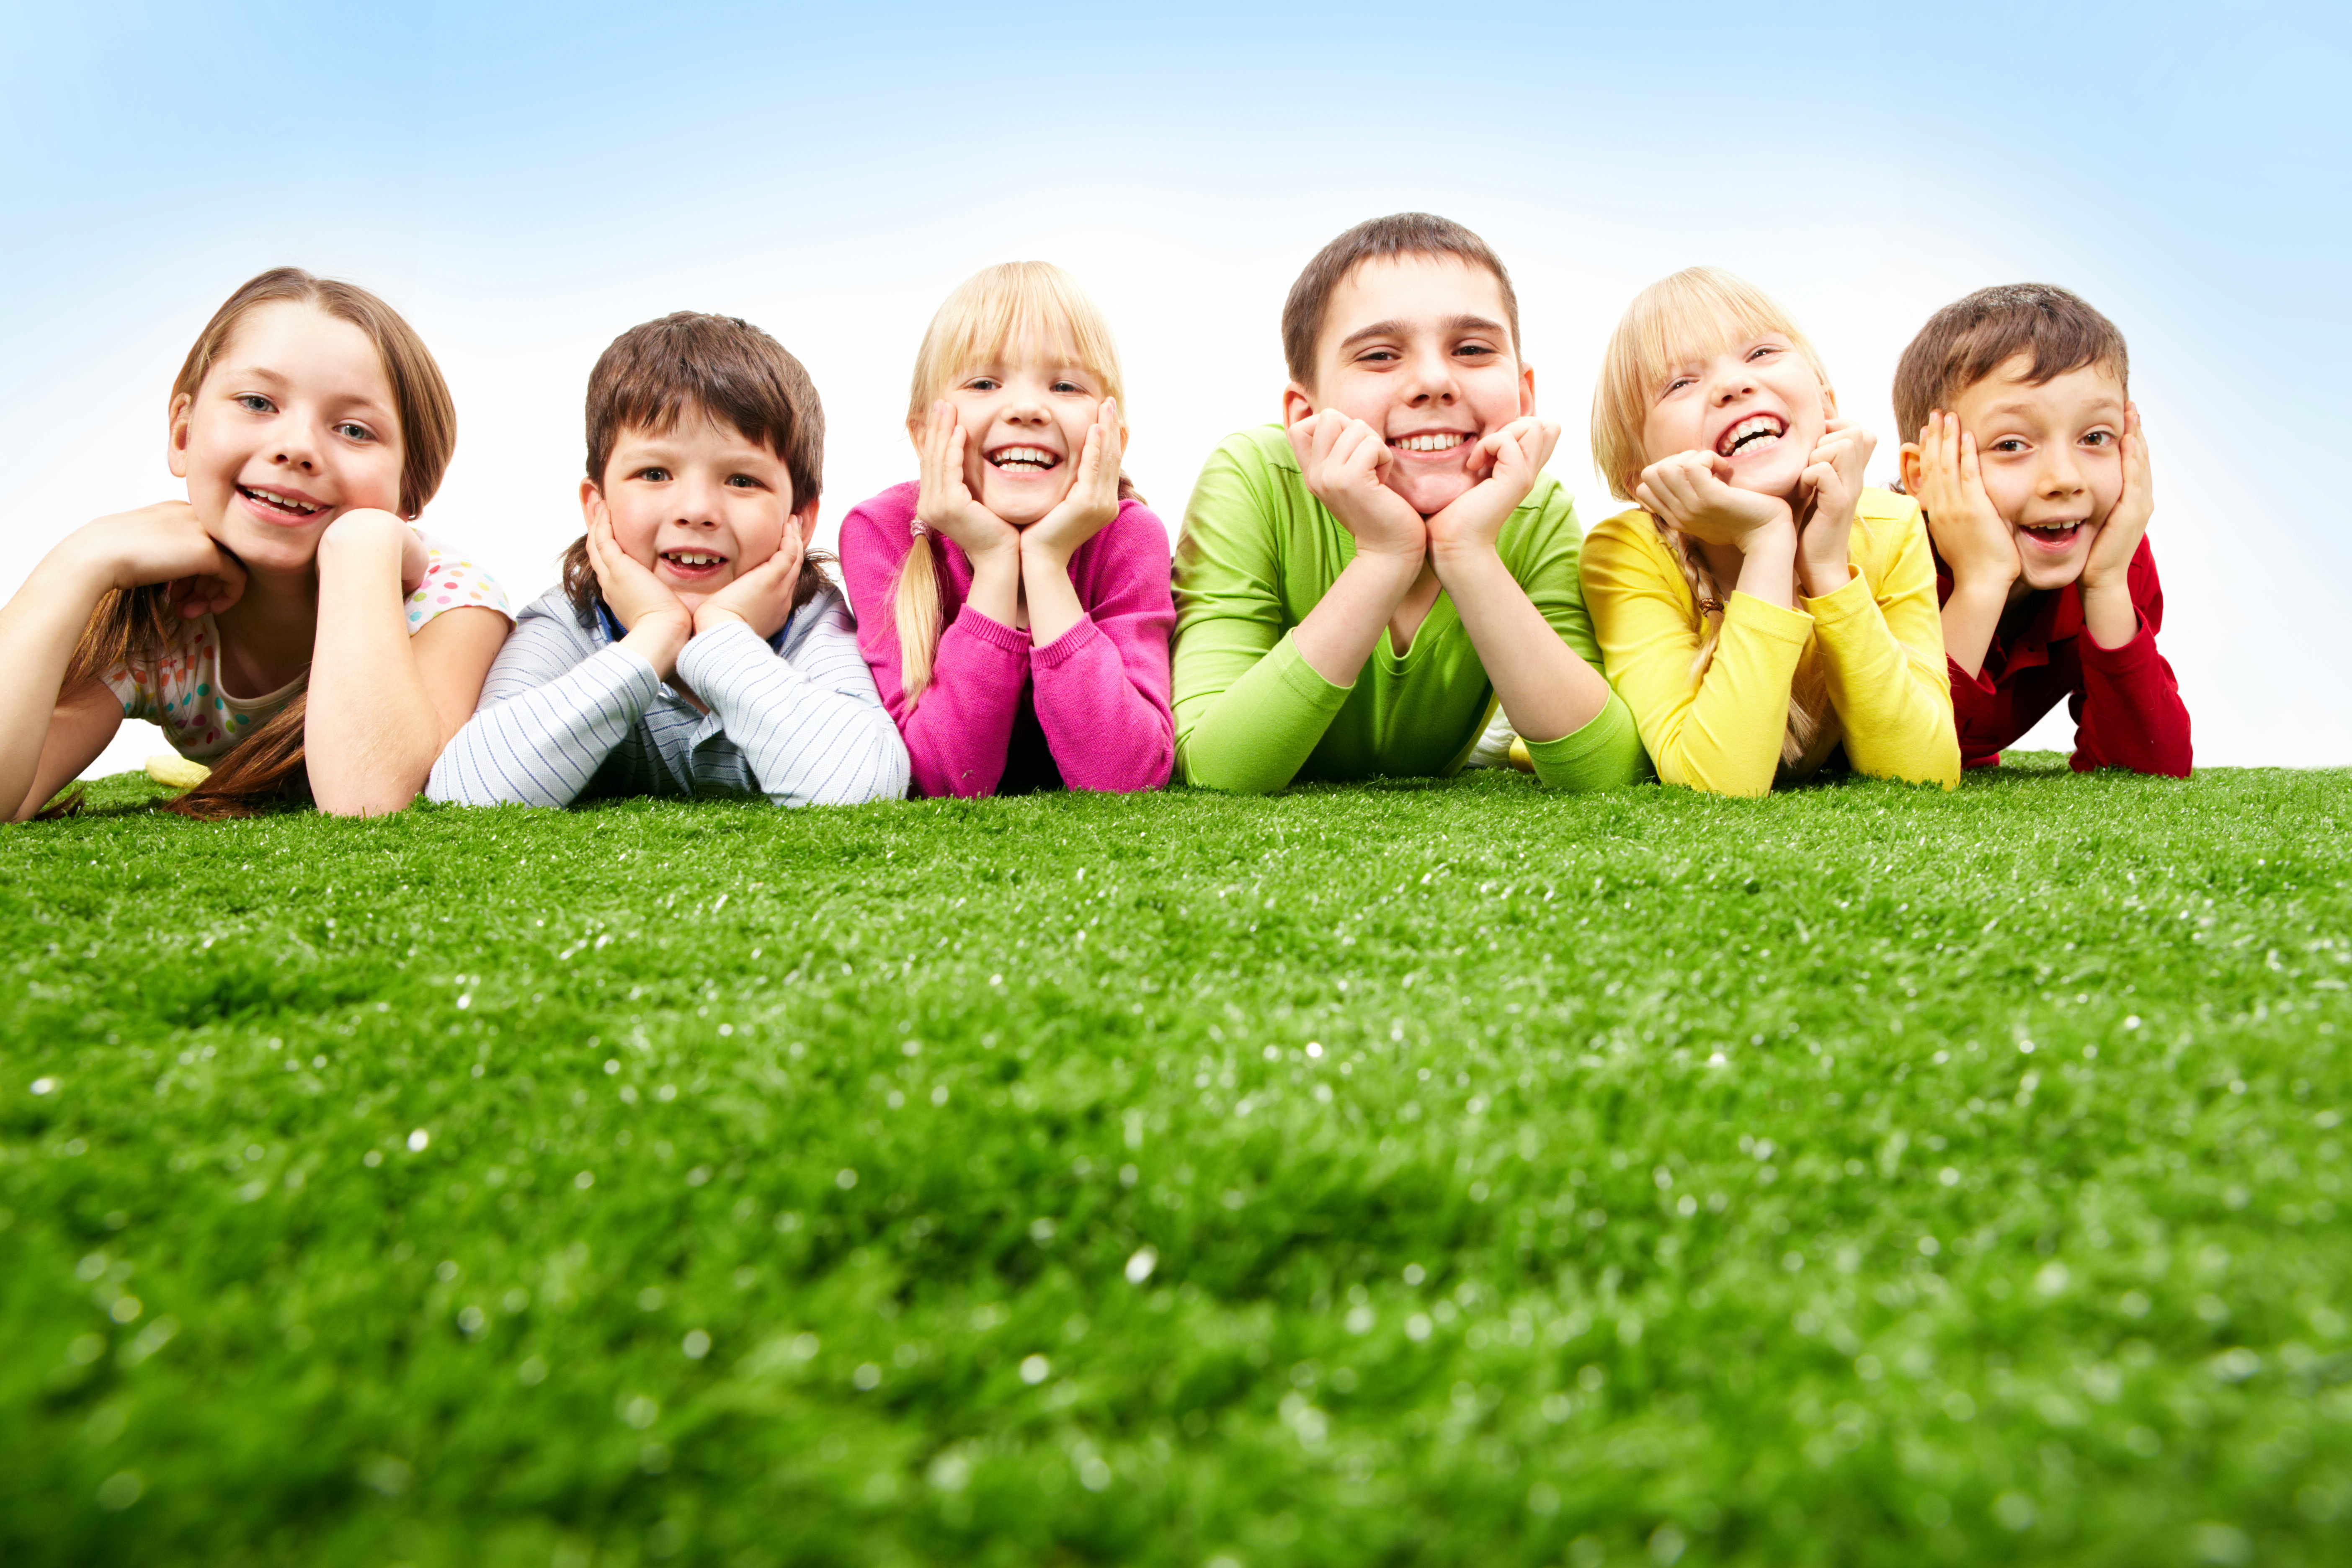 Six happy children smile together why lying down on the grass.